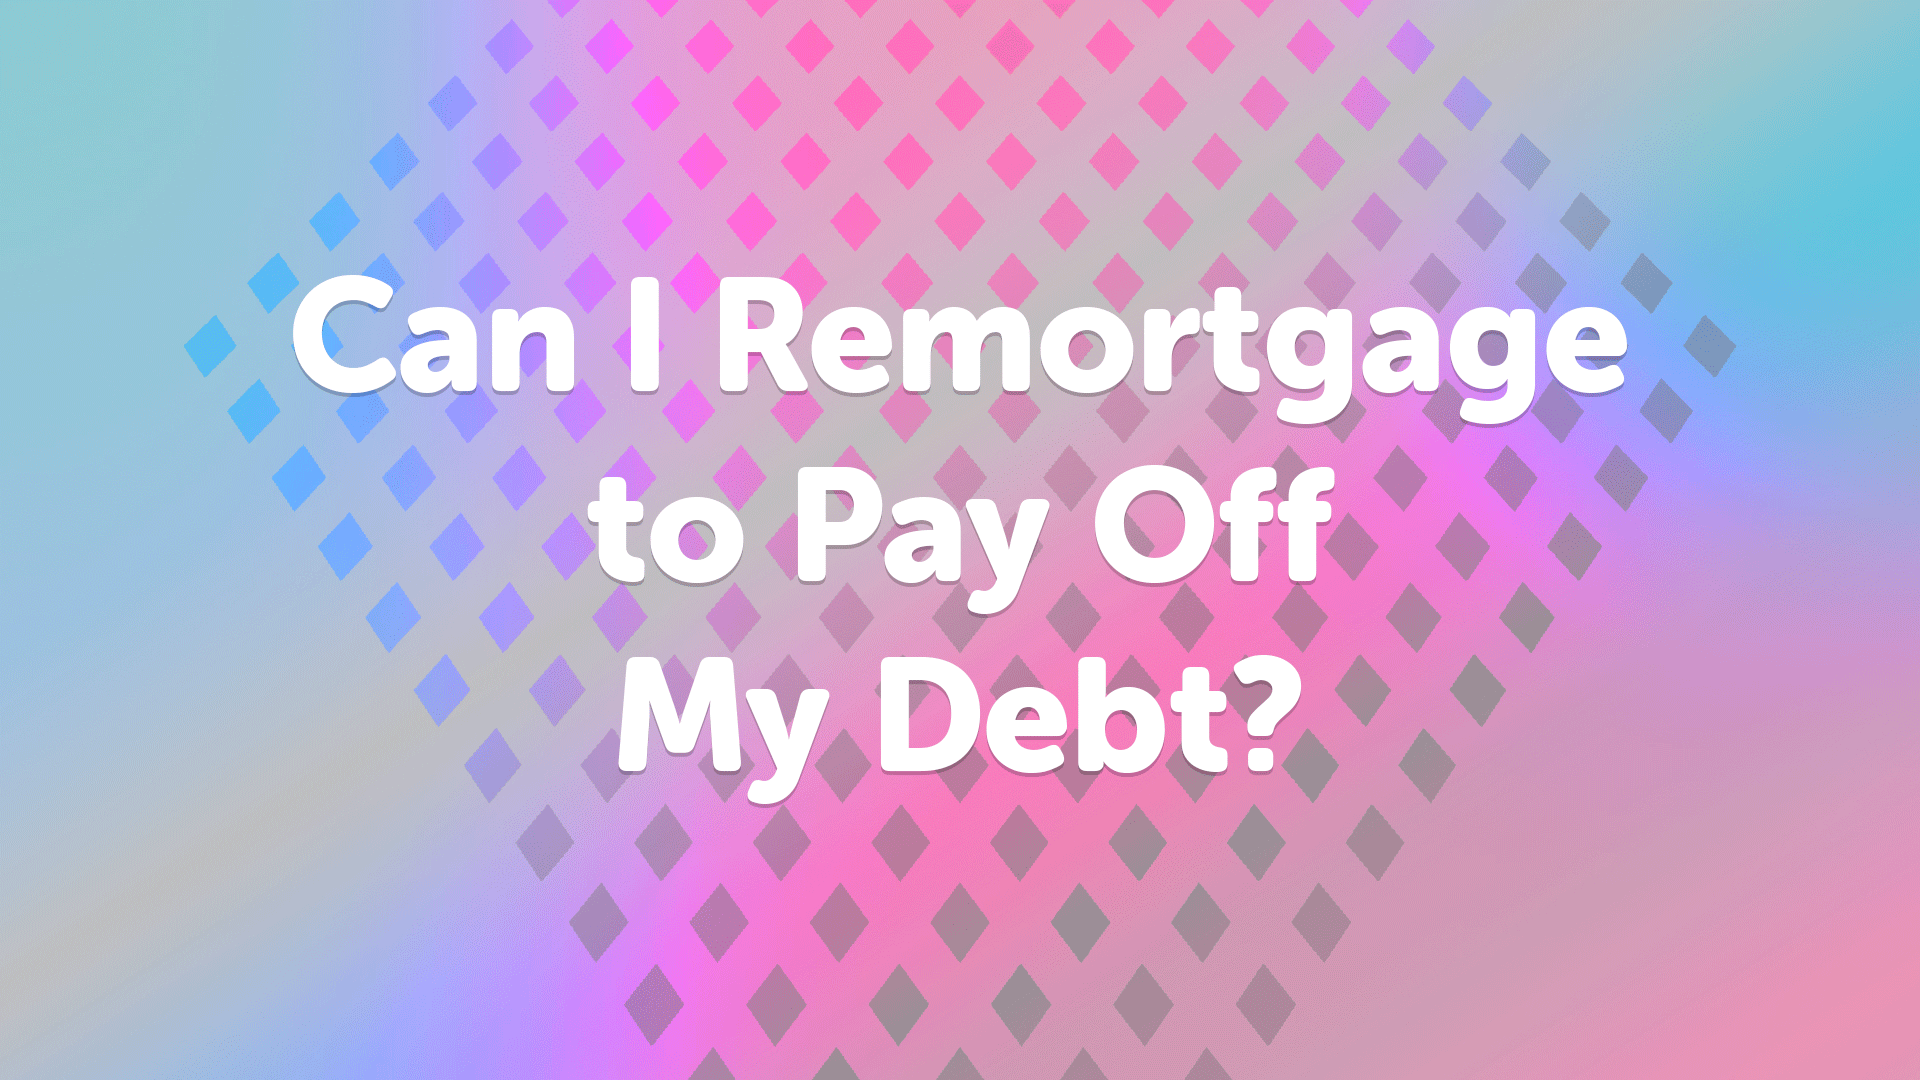 Can I remortgage in Cambridge to pay off my debt? | Cambridgemoneyman